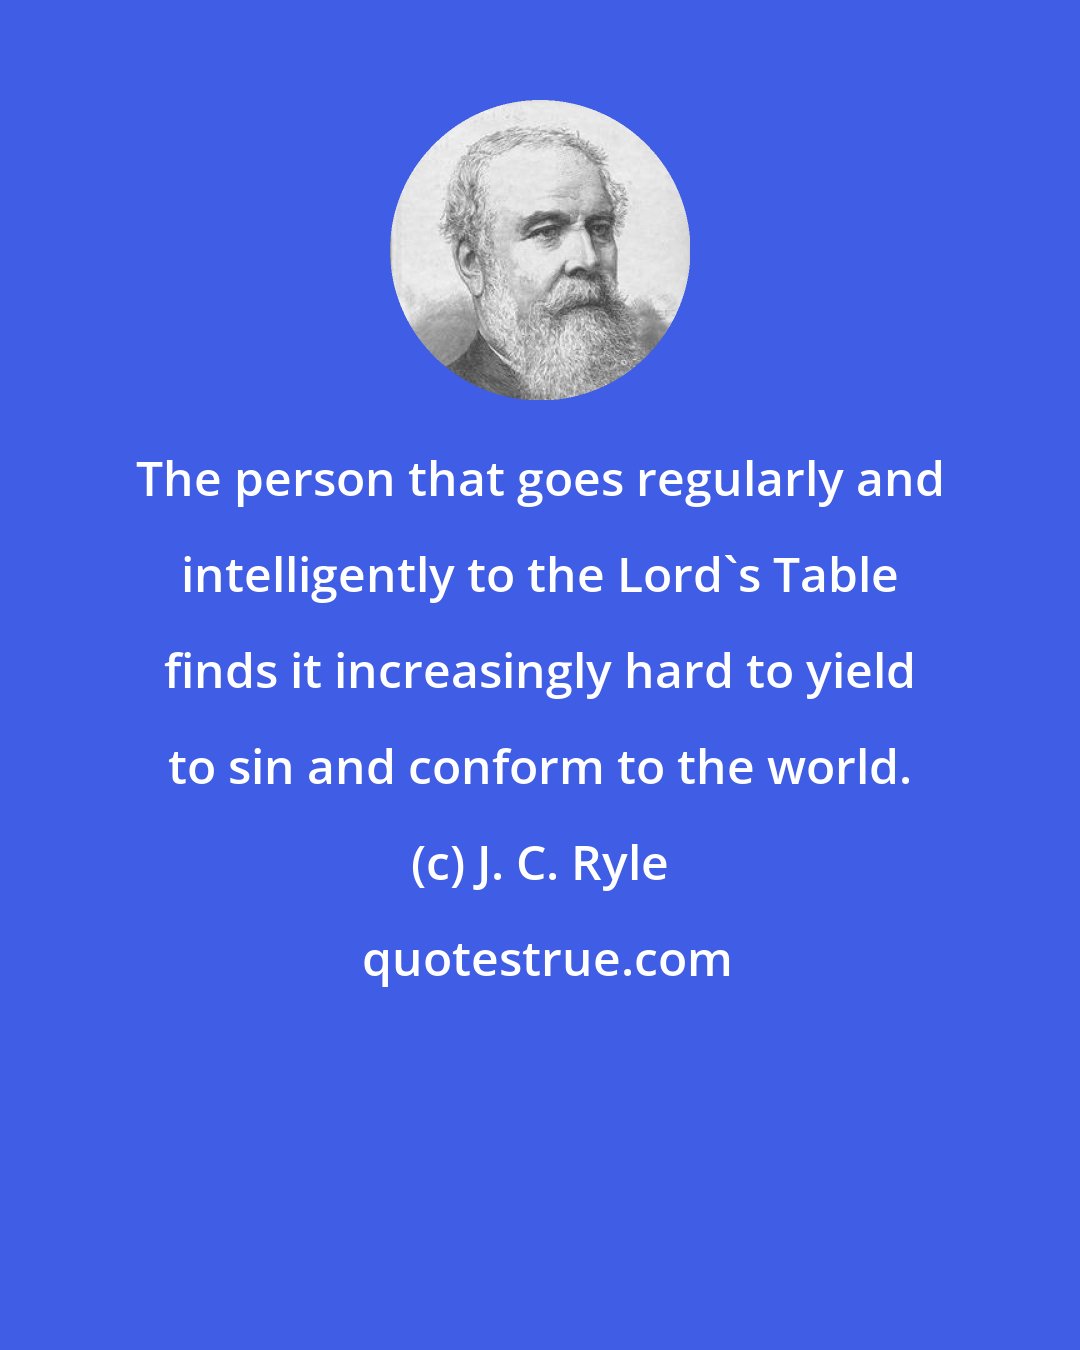 J. C. Ryle: The person that goes regularly and intelligently to the Lord's Table finds it increasingly hard to yield to sin and conform to the world.